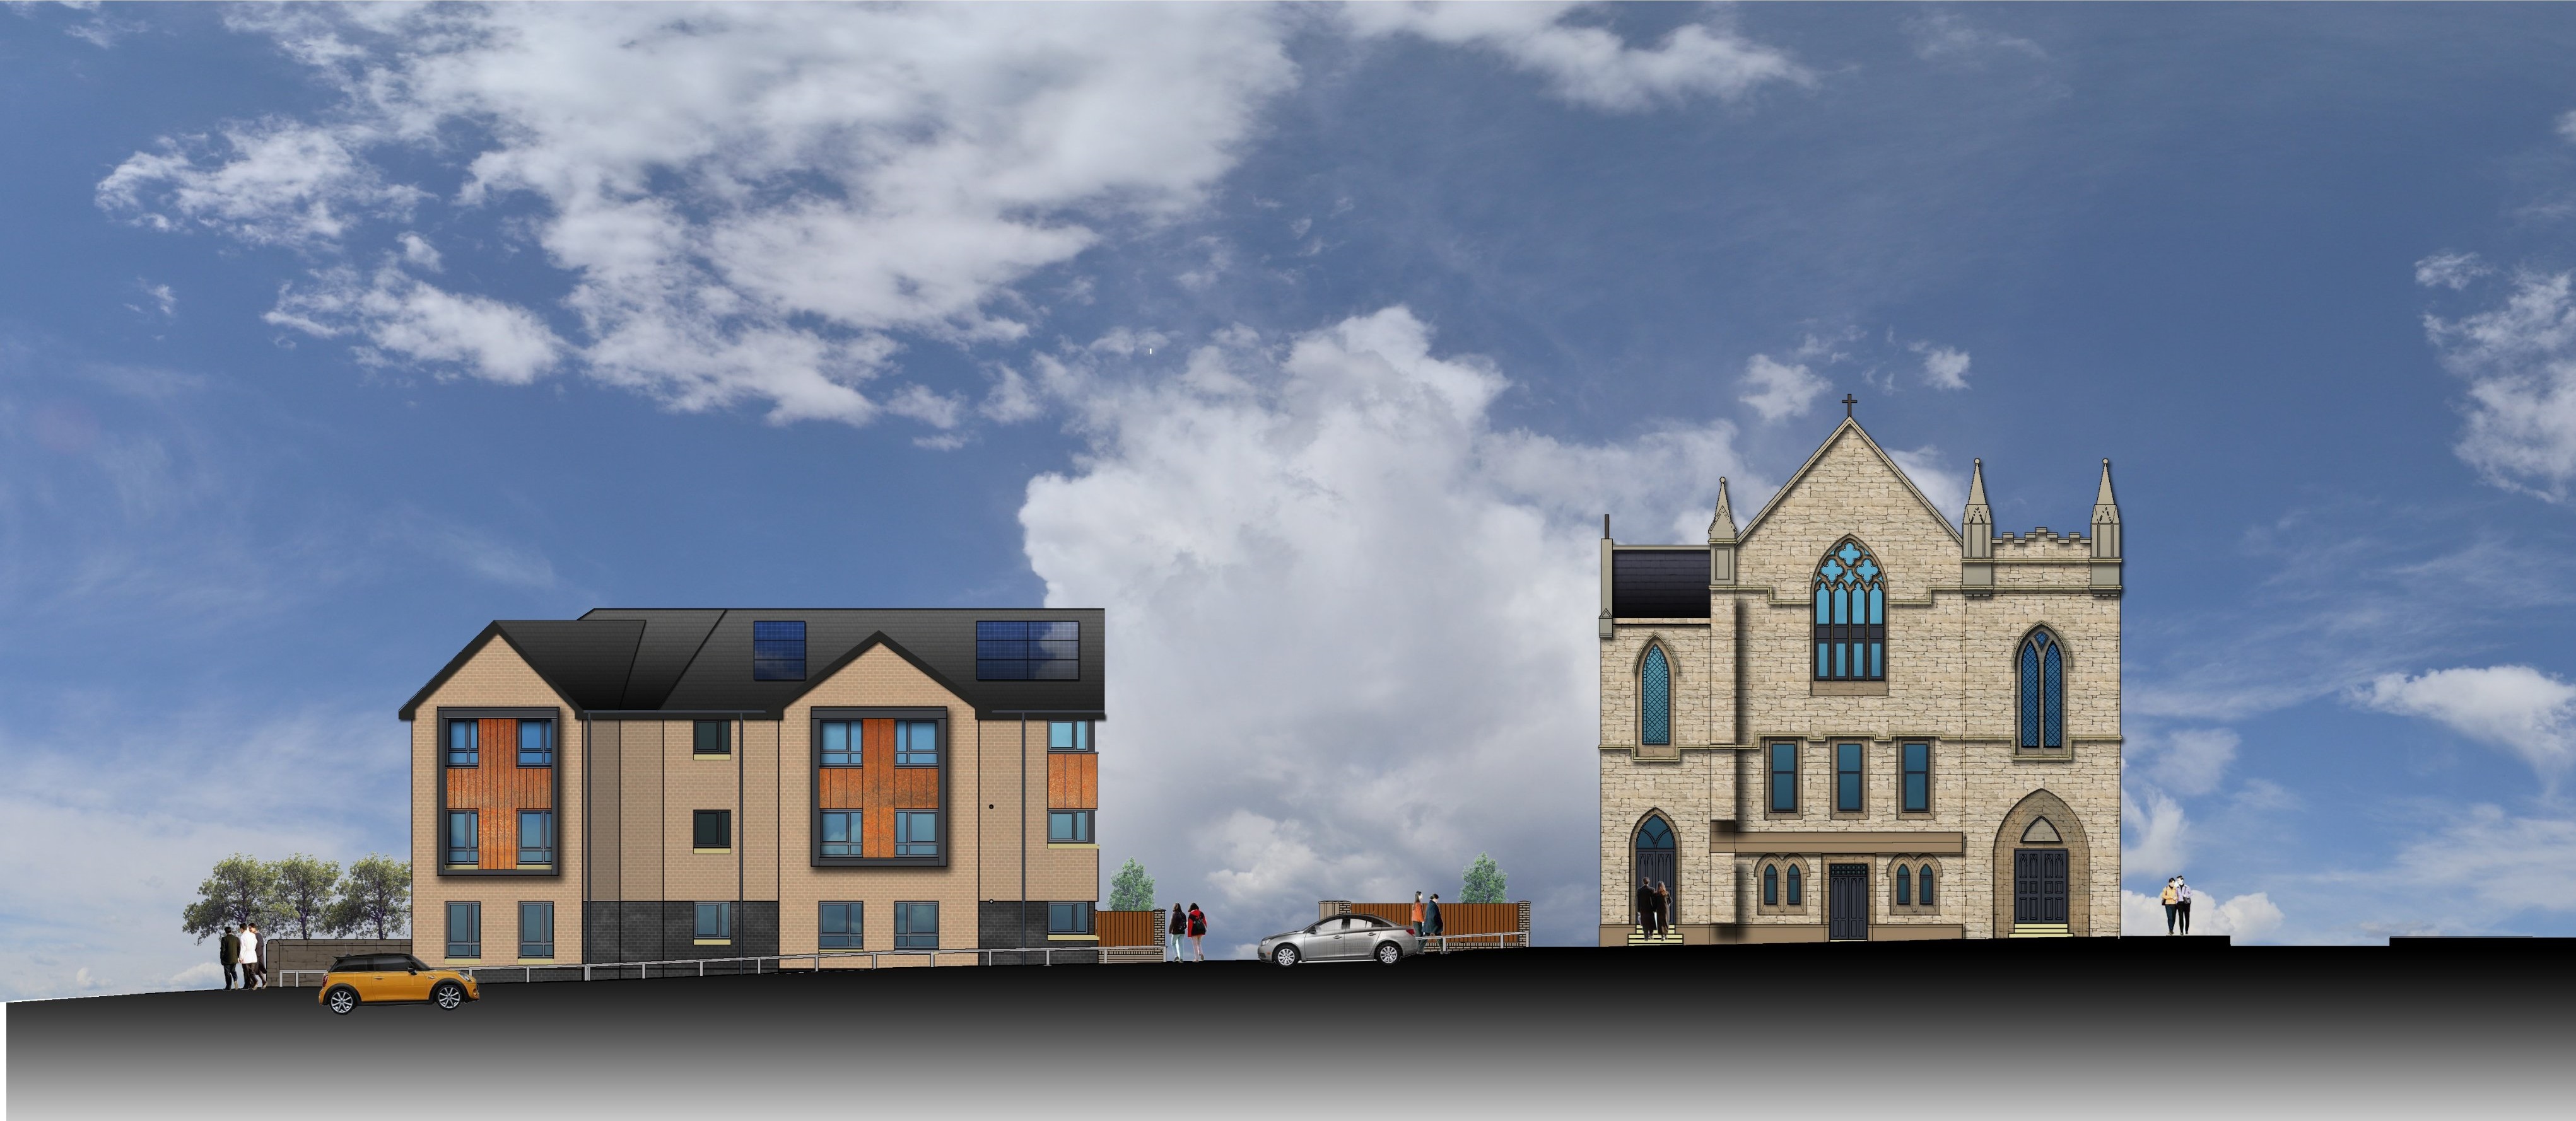 Progress made on social housing conversion of Airdrie church